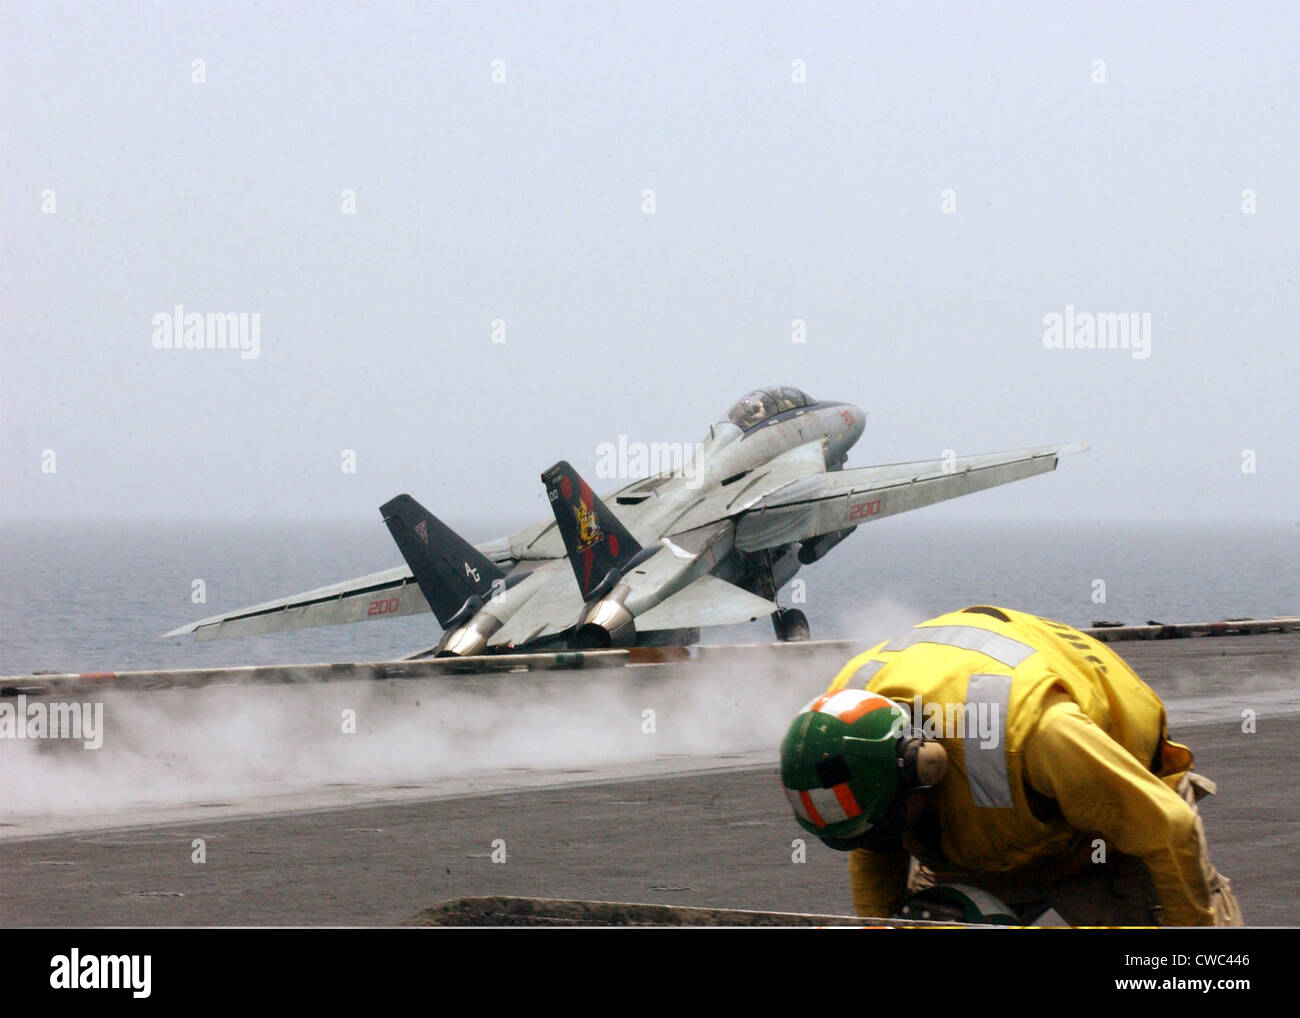 F-14 Tomcat fighter launches from the flight deck of the aircraft carrier USS John F. Kennedy on a combat missions over Stock Photo